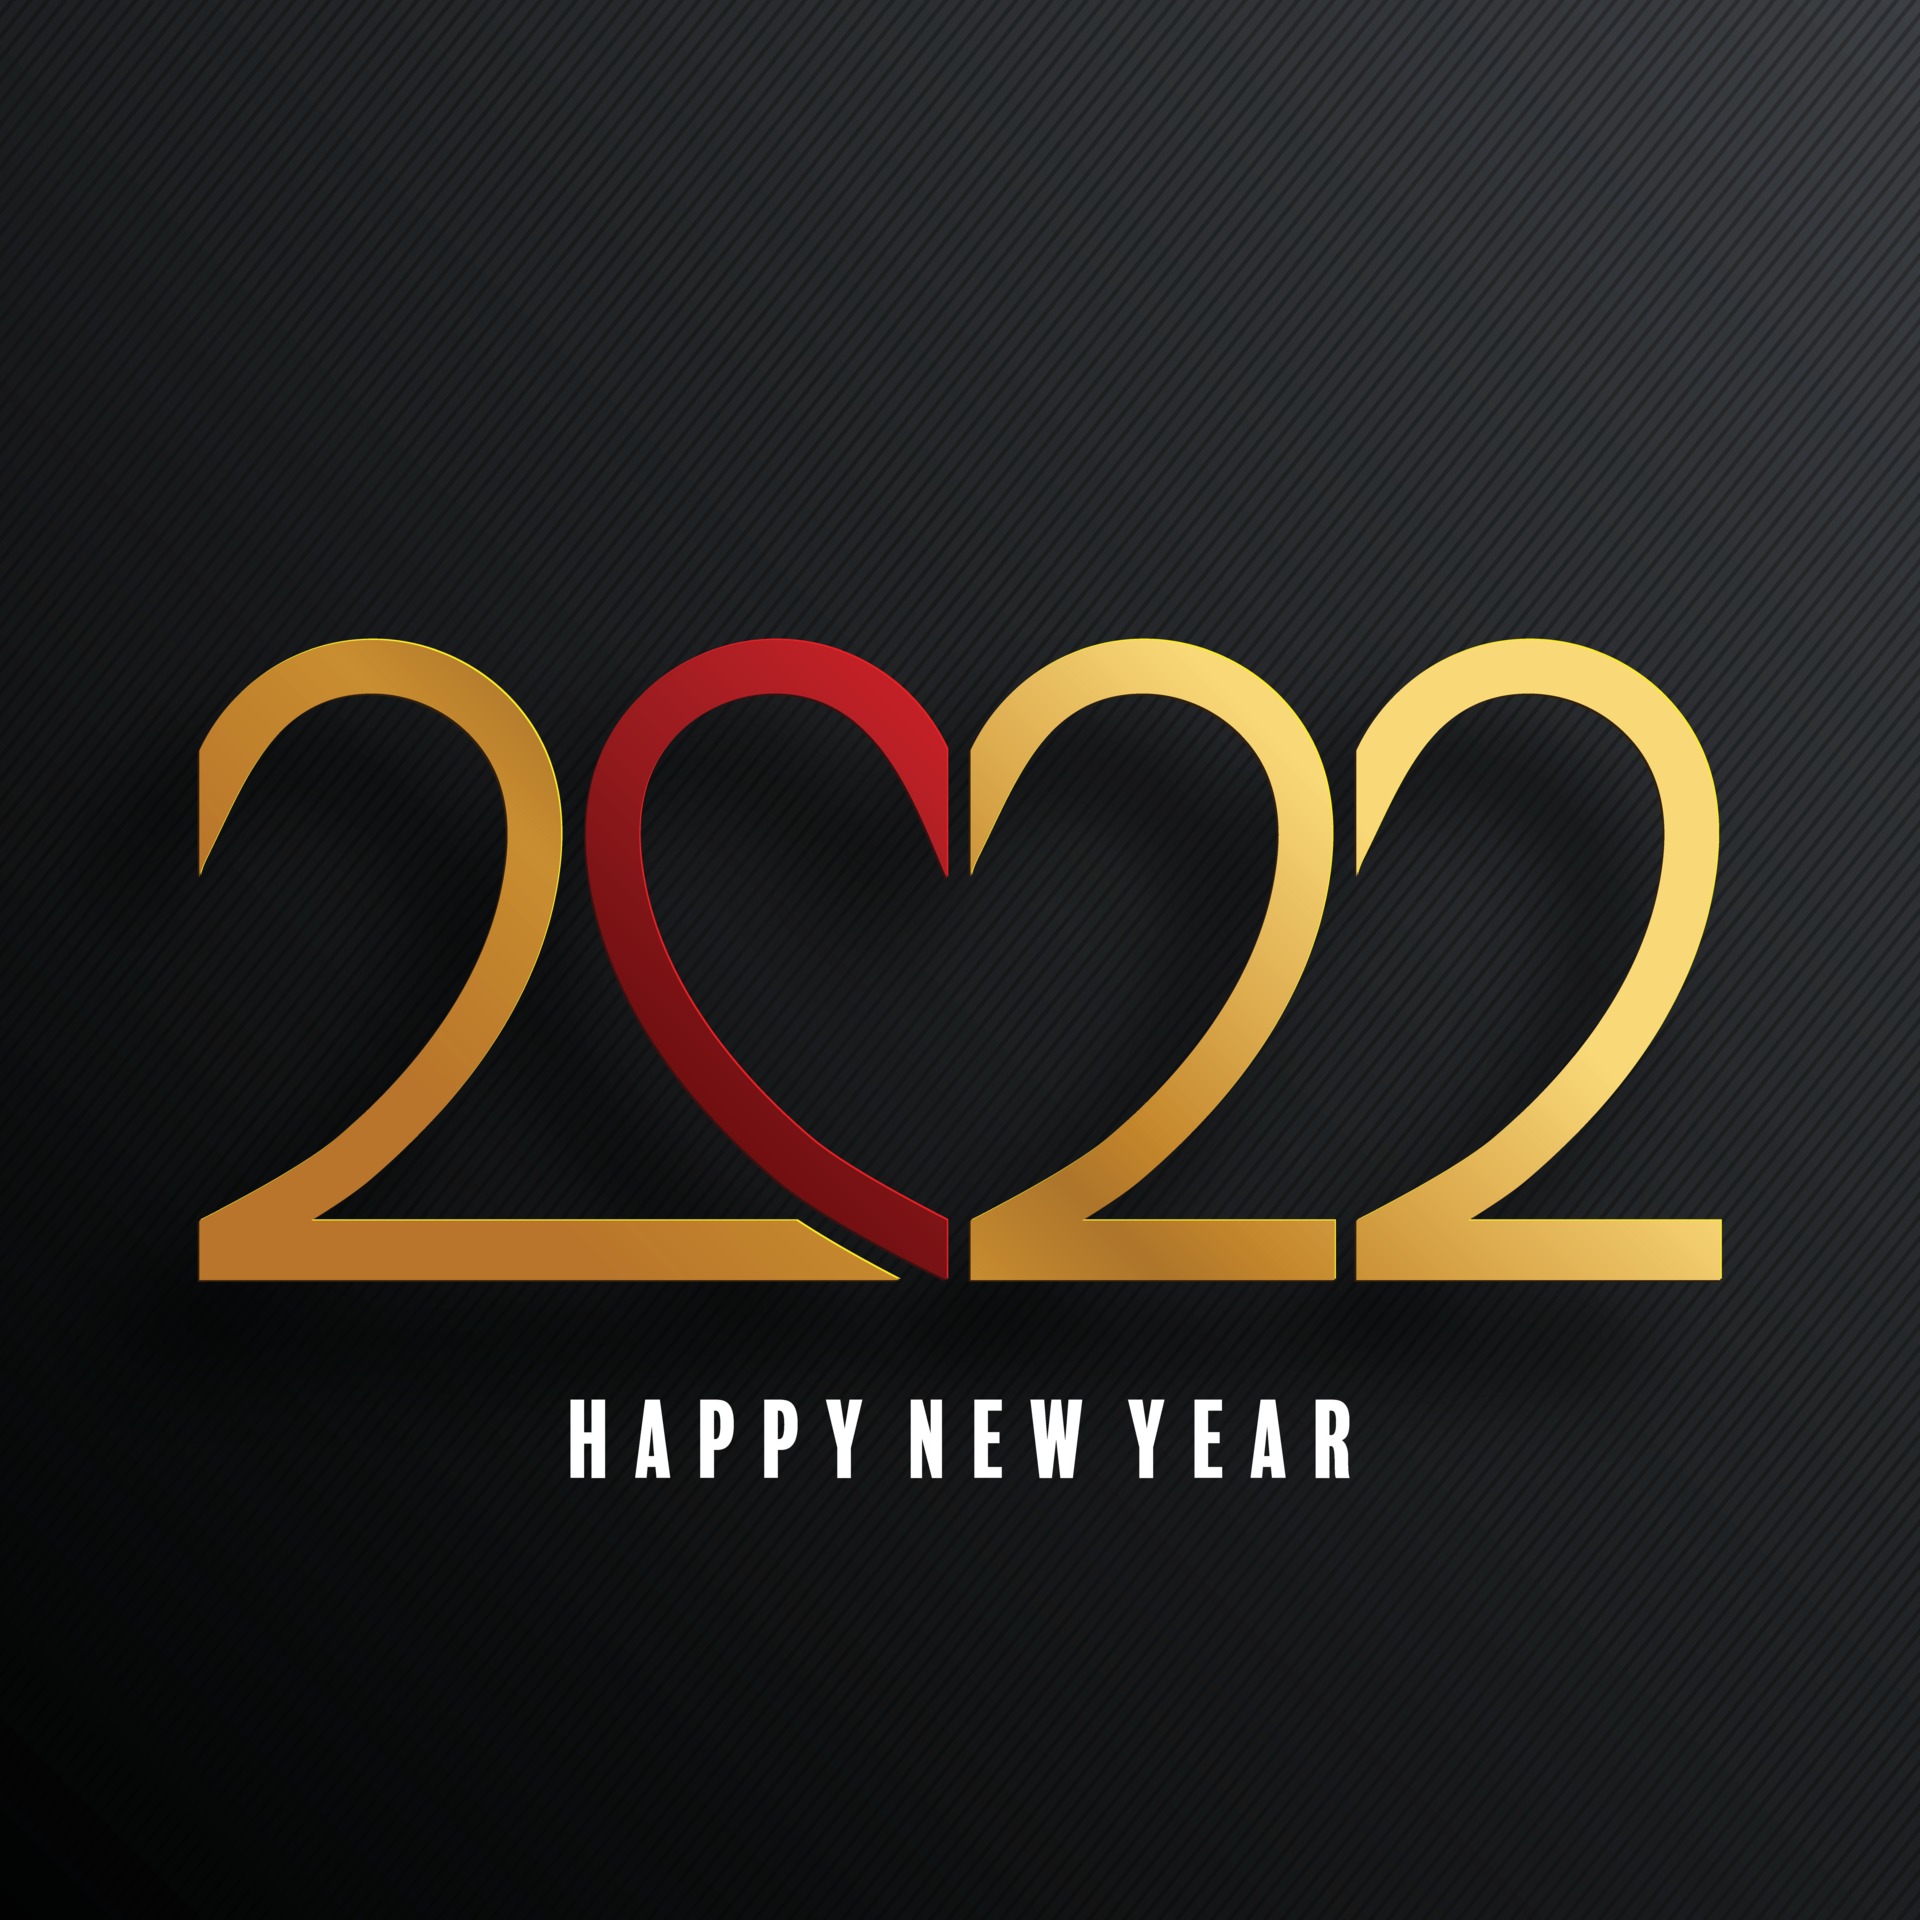 2022 New Year Images